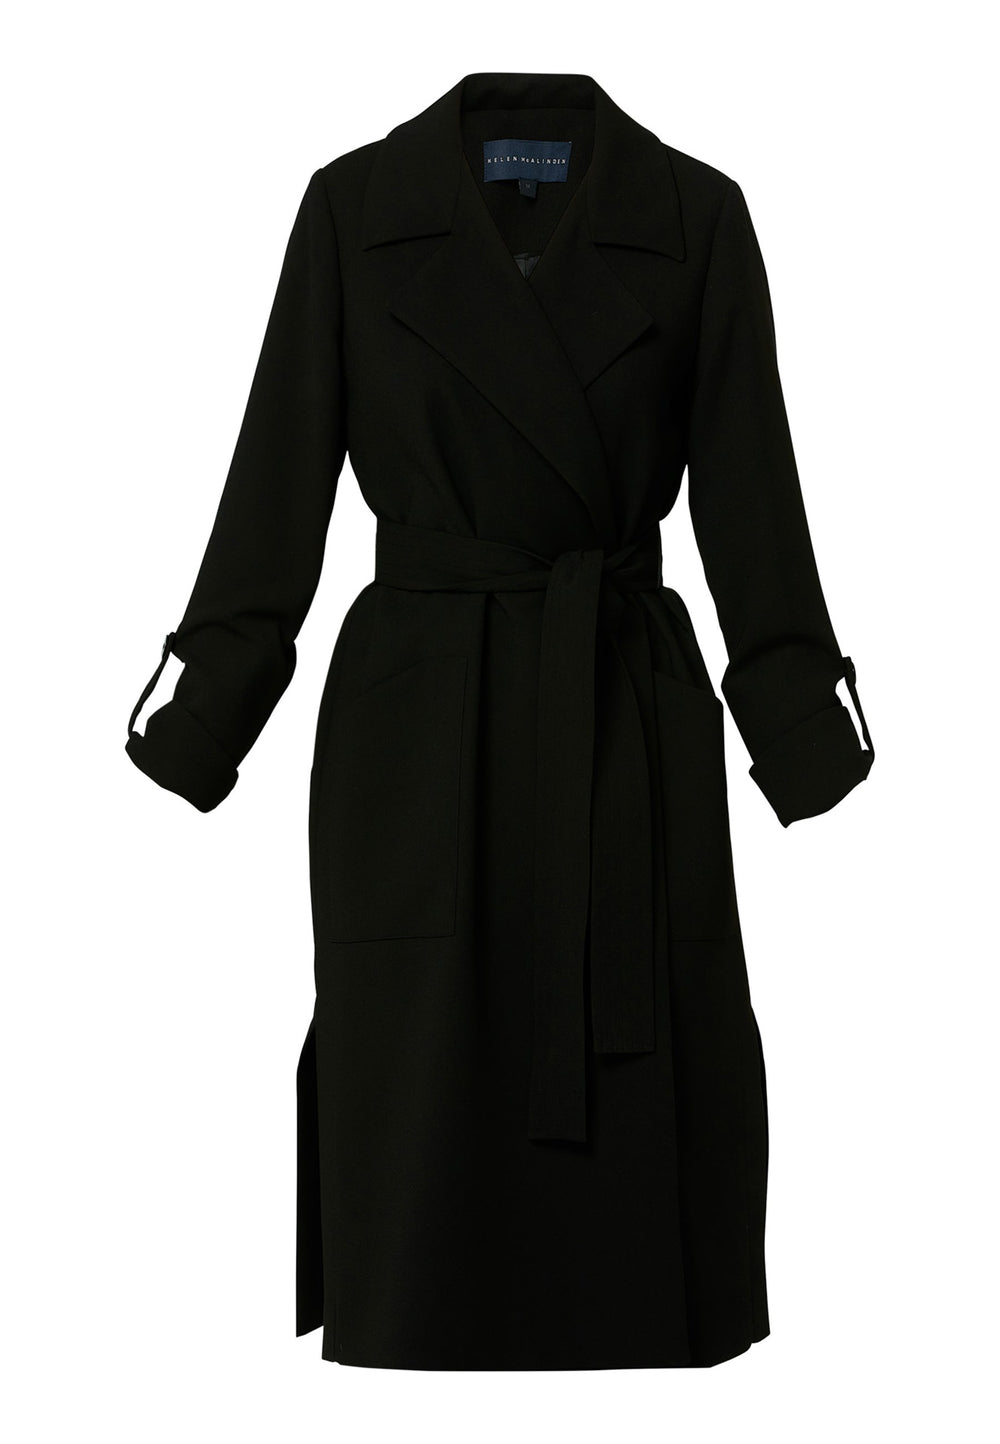 Lydiah, black trench coat in a fluid satin back crepe. This coat features a relaxed, flowing silhouette, a self-tie belt, and front pockets. The design includes buttoned cuffs and a wide lapel. Pair with coordinating trouser for a chic monochromatic look.